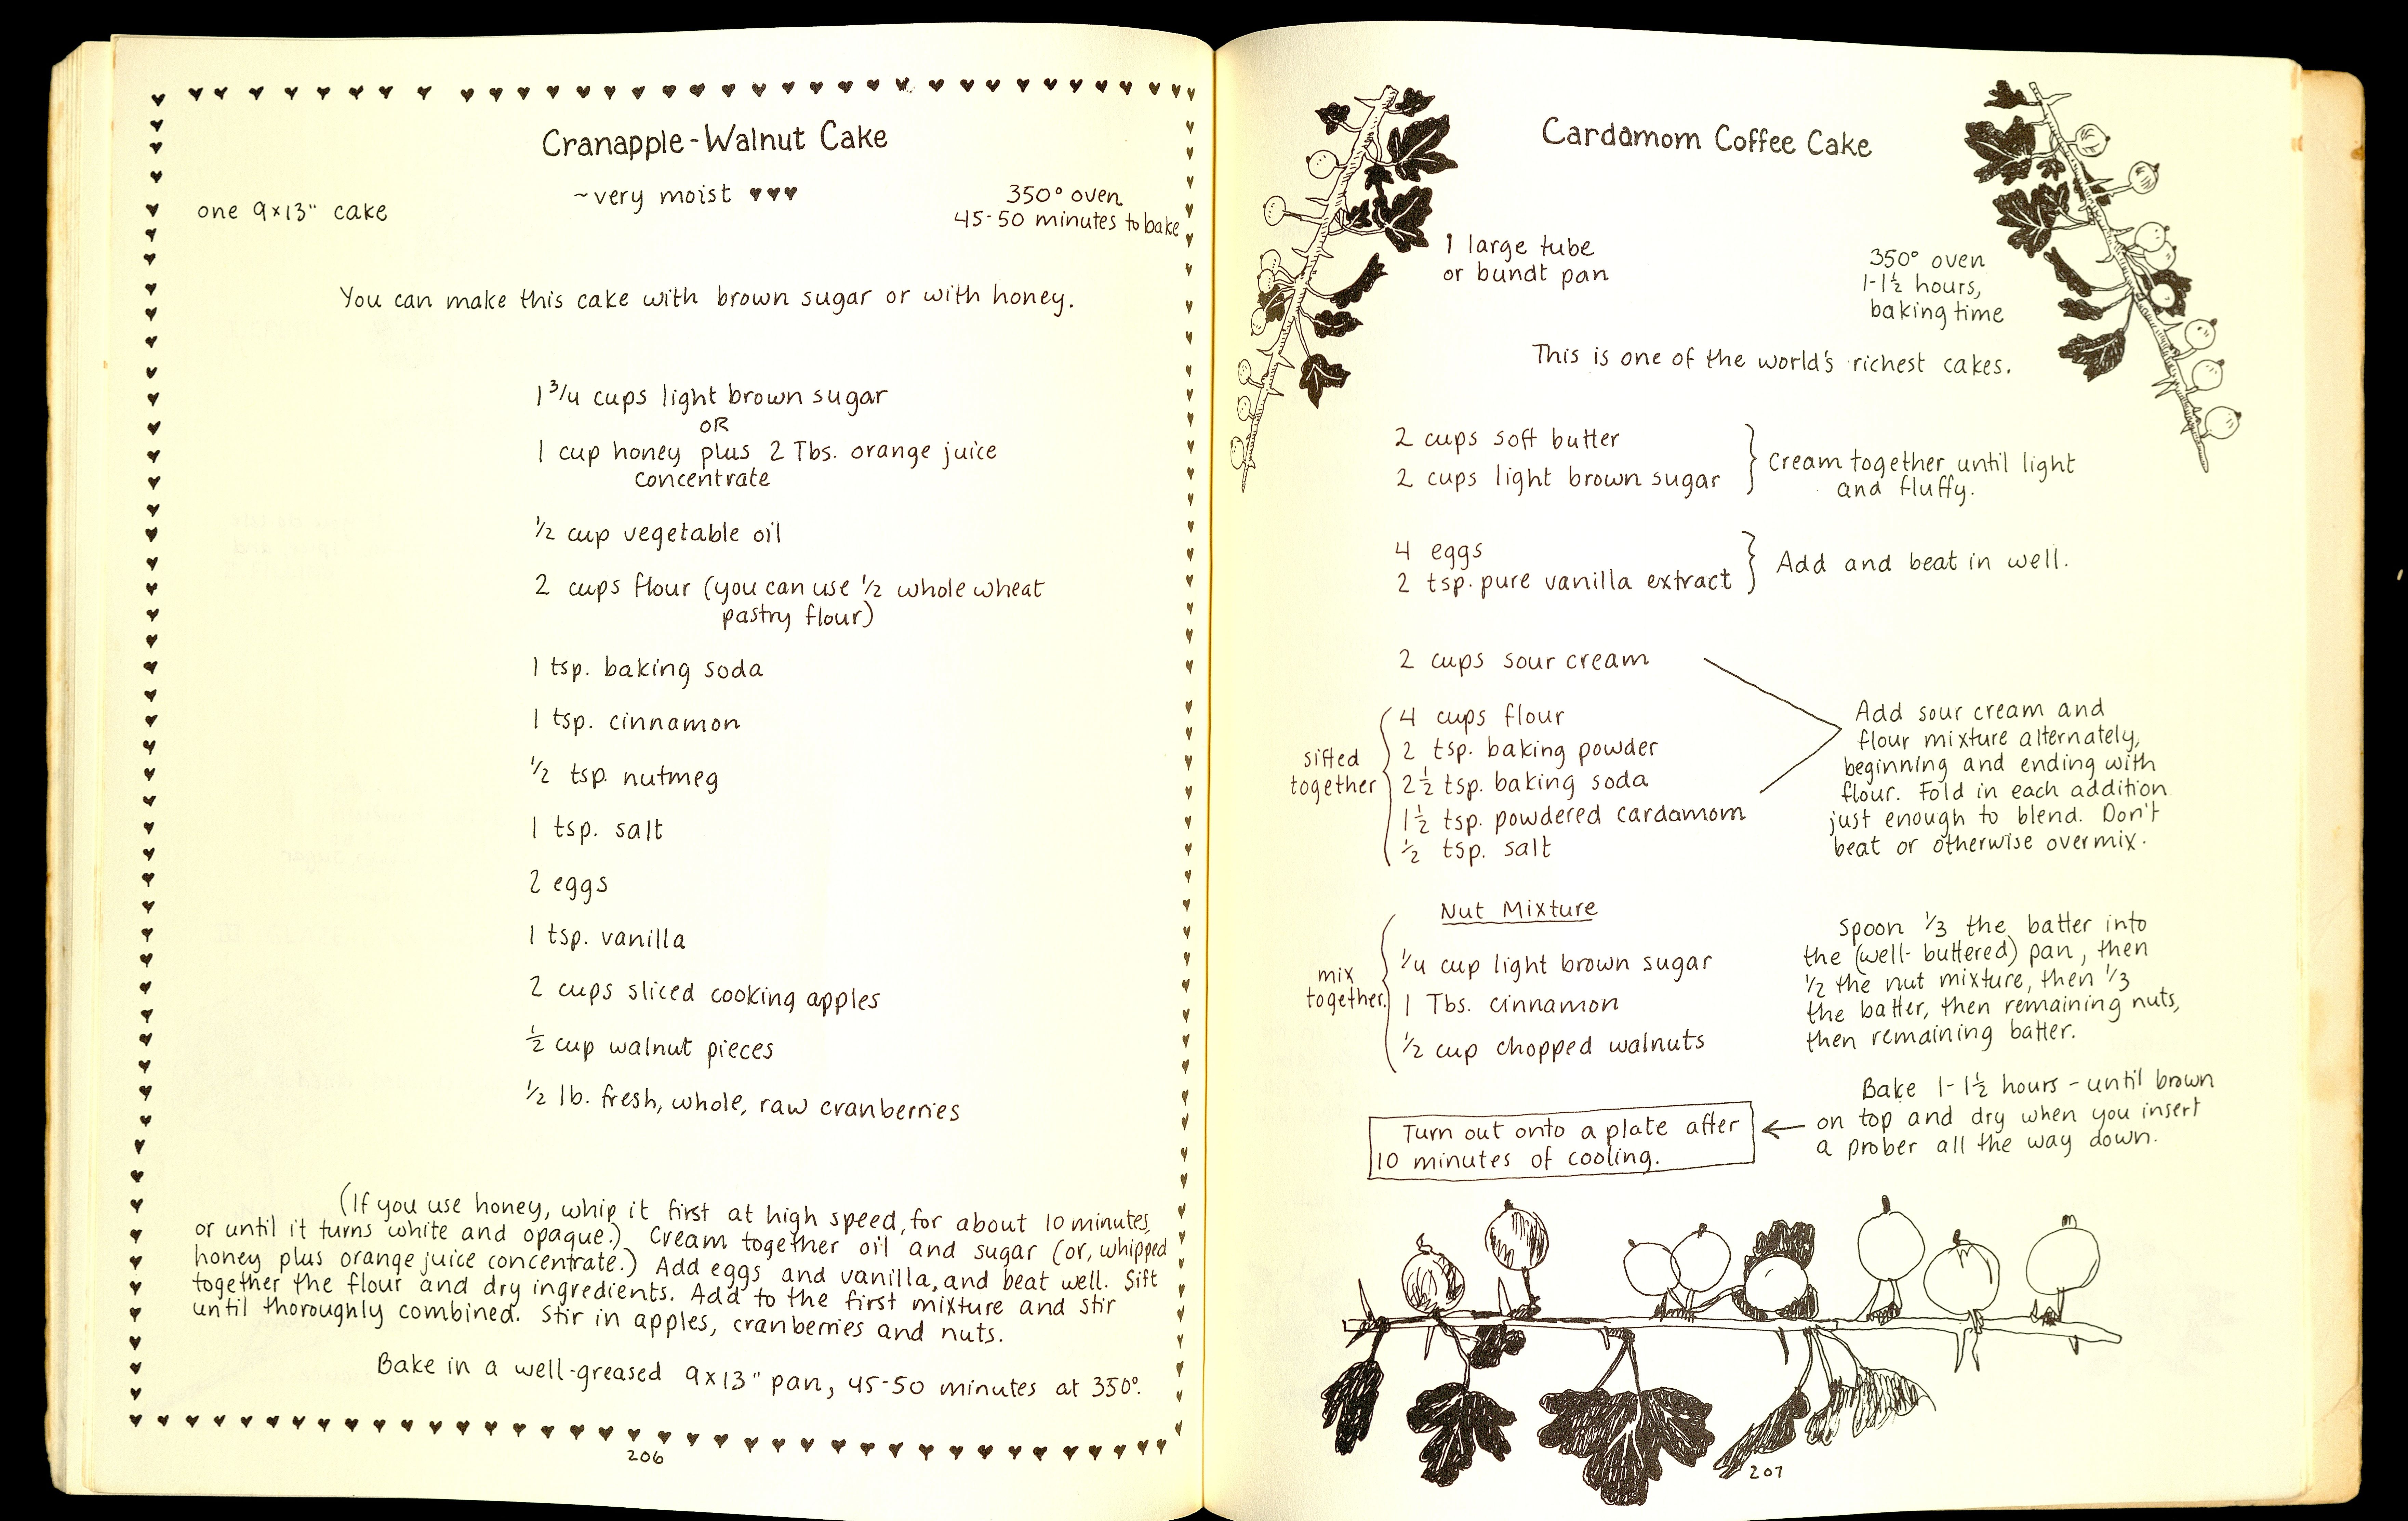 Pagespread of recipes from The Moosewood Cookbook for Cran-apple Walnut Cake and Cardamom Coffee Cake